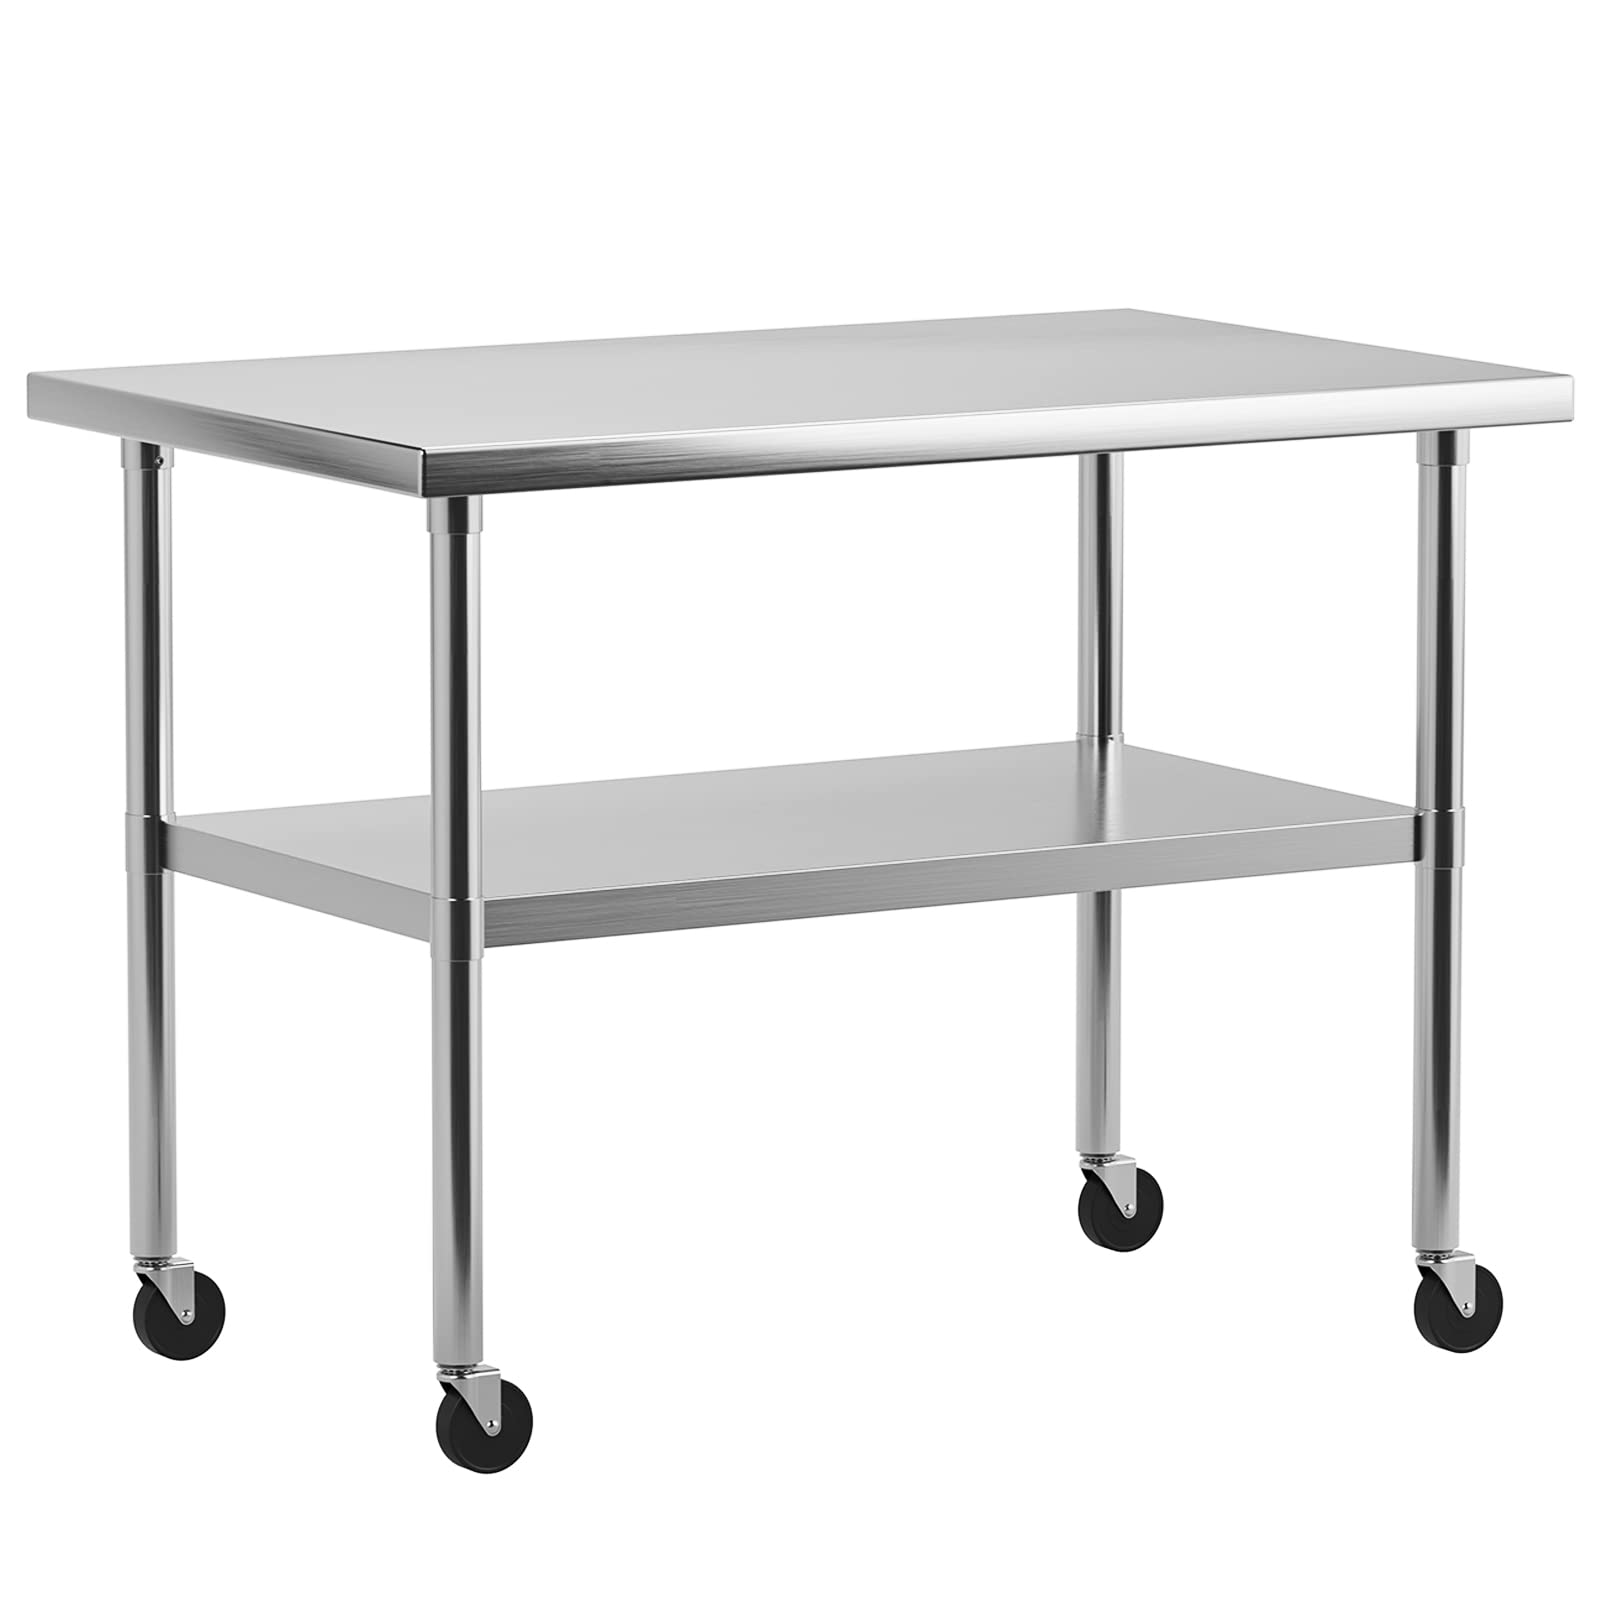 Stainless Steel Work Table with Undershelf Commercial Kitchen Prep Table